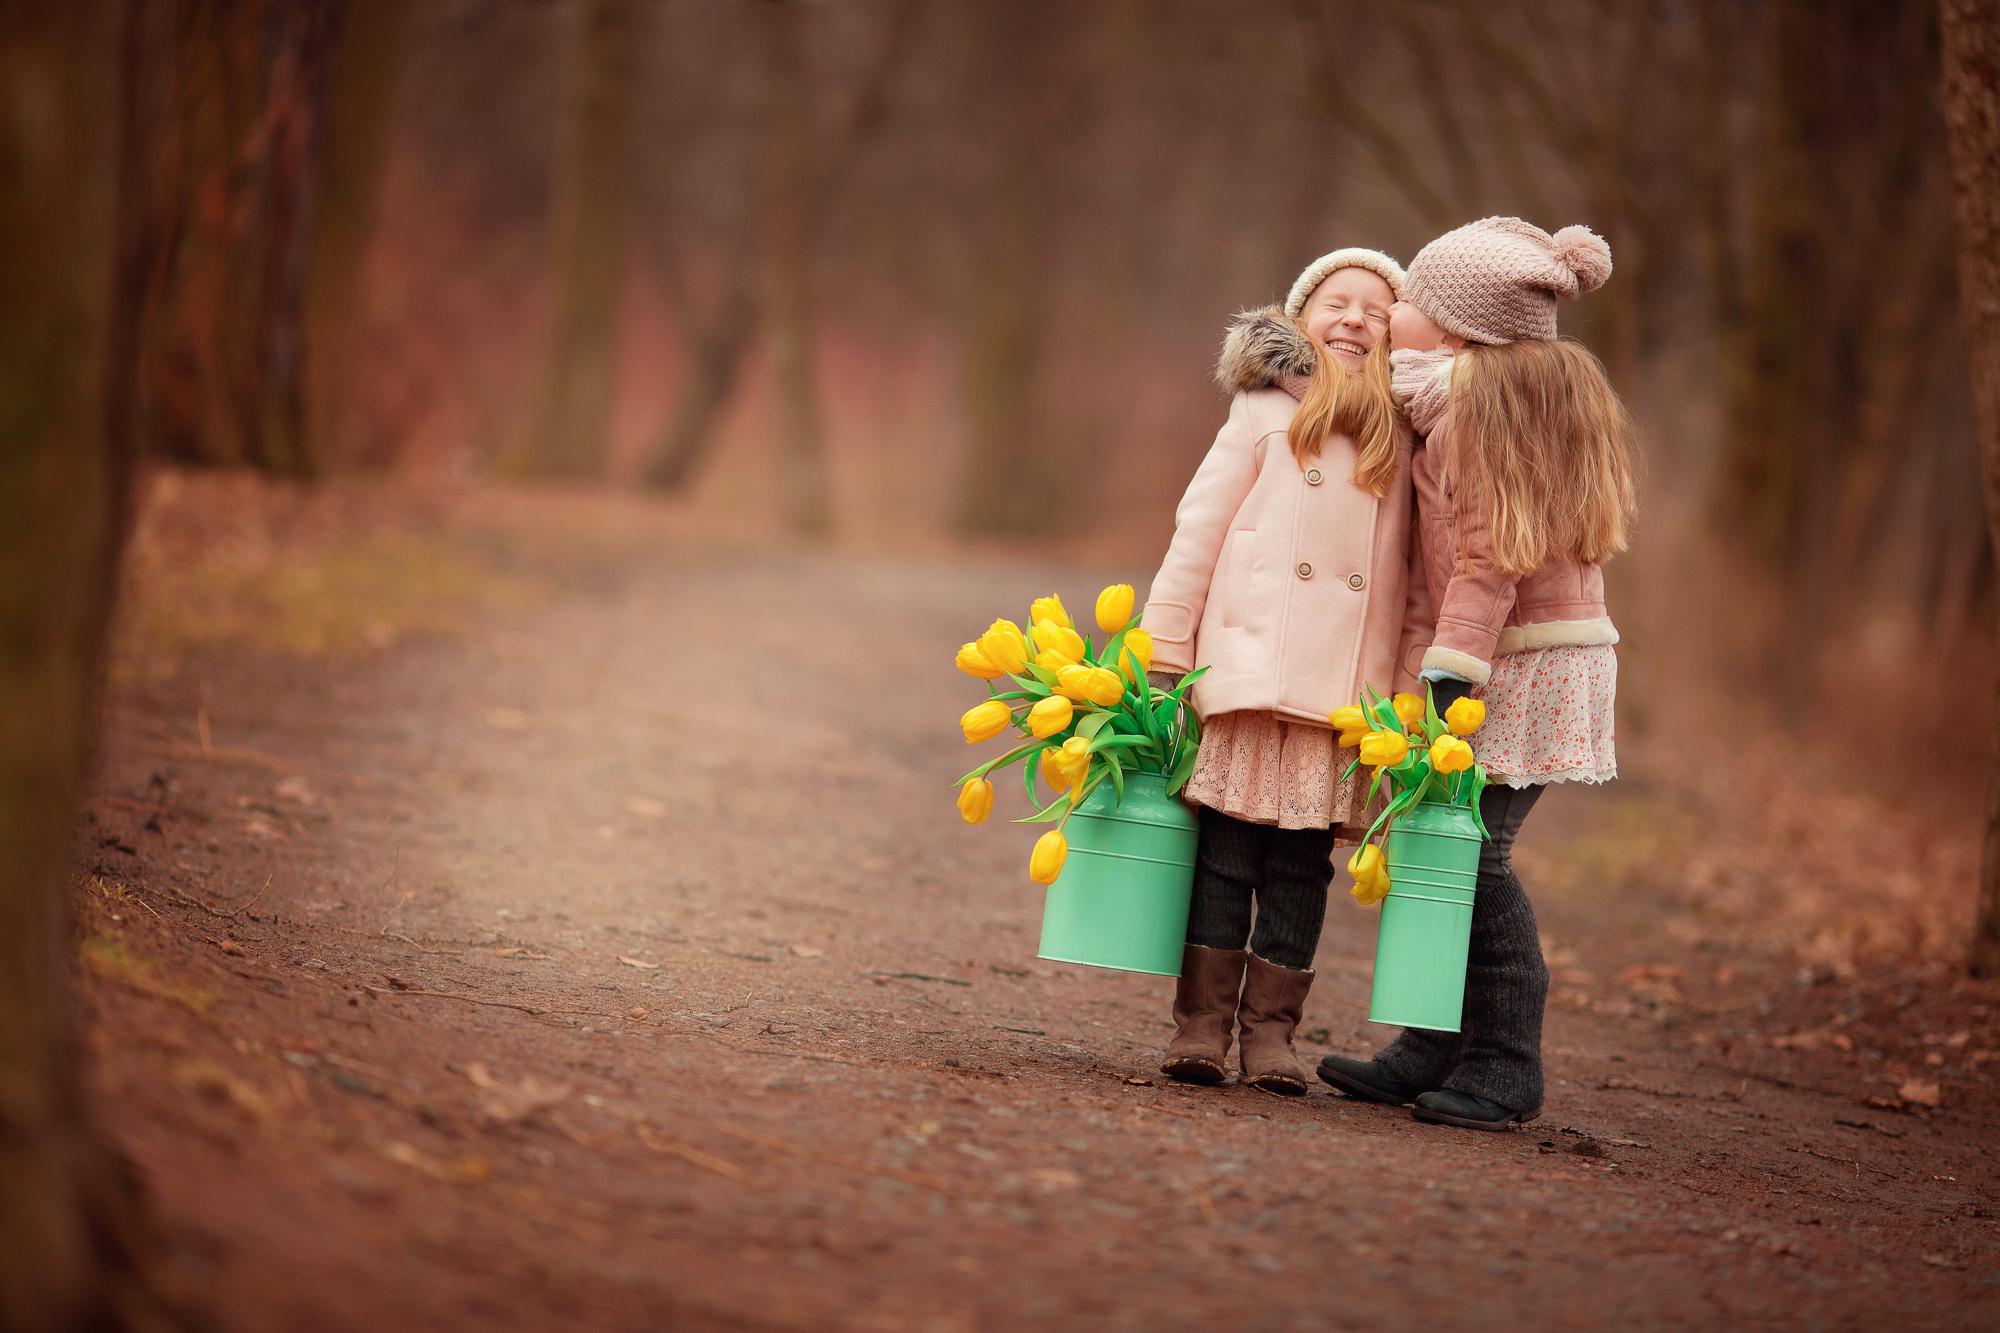 Wallpaper. Children. photo. picture. forest, spring, road